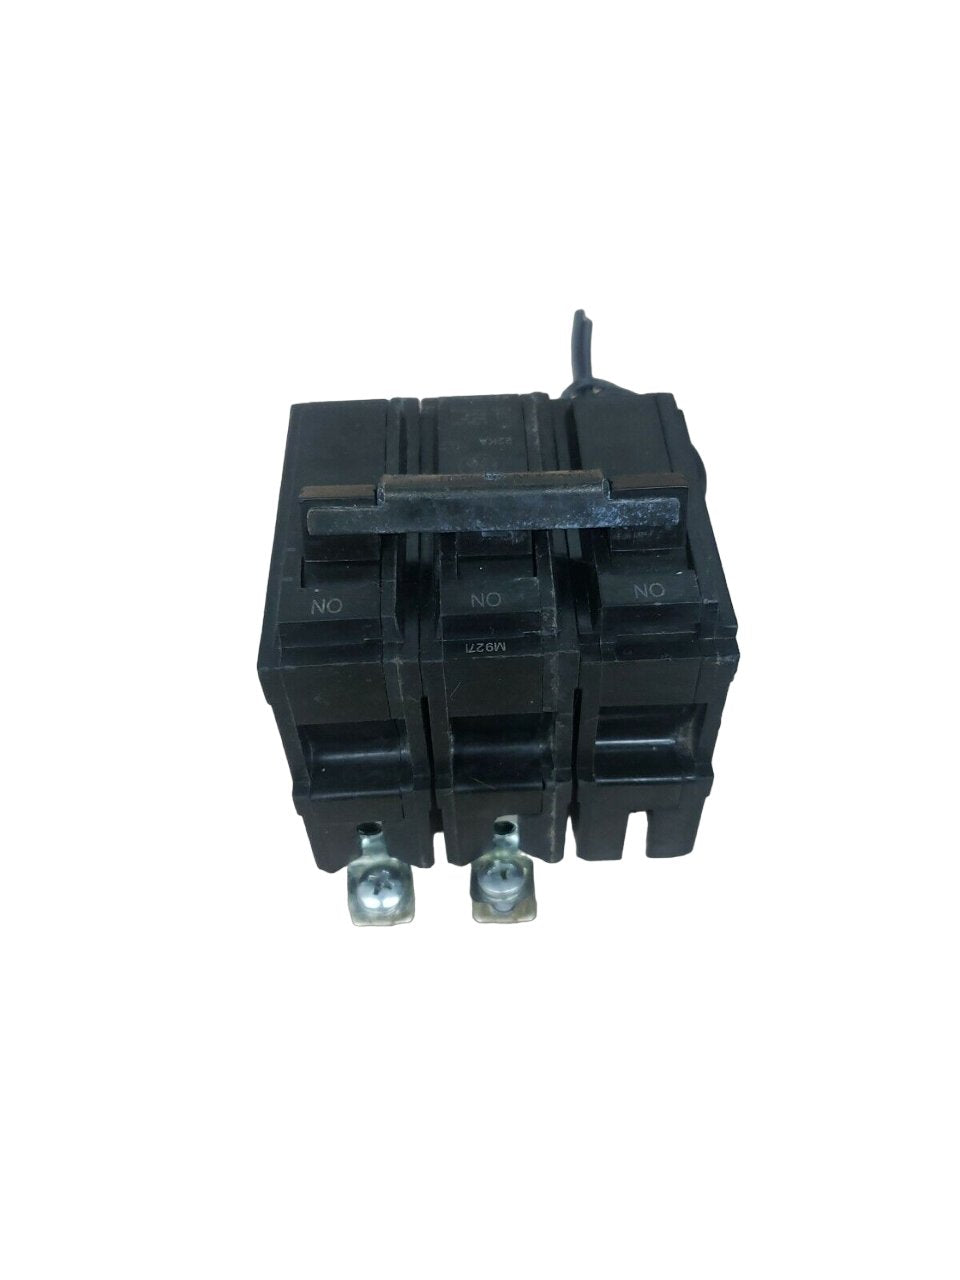 THHQB2150ST1 - General Electrics - Molded Case Circuit Breakers